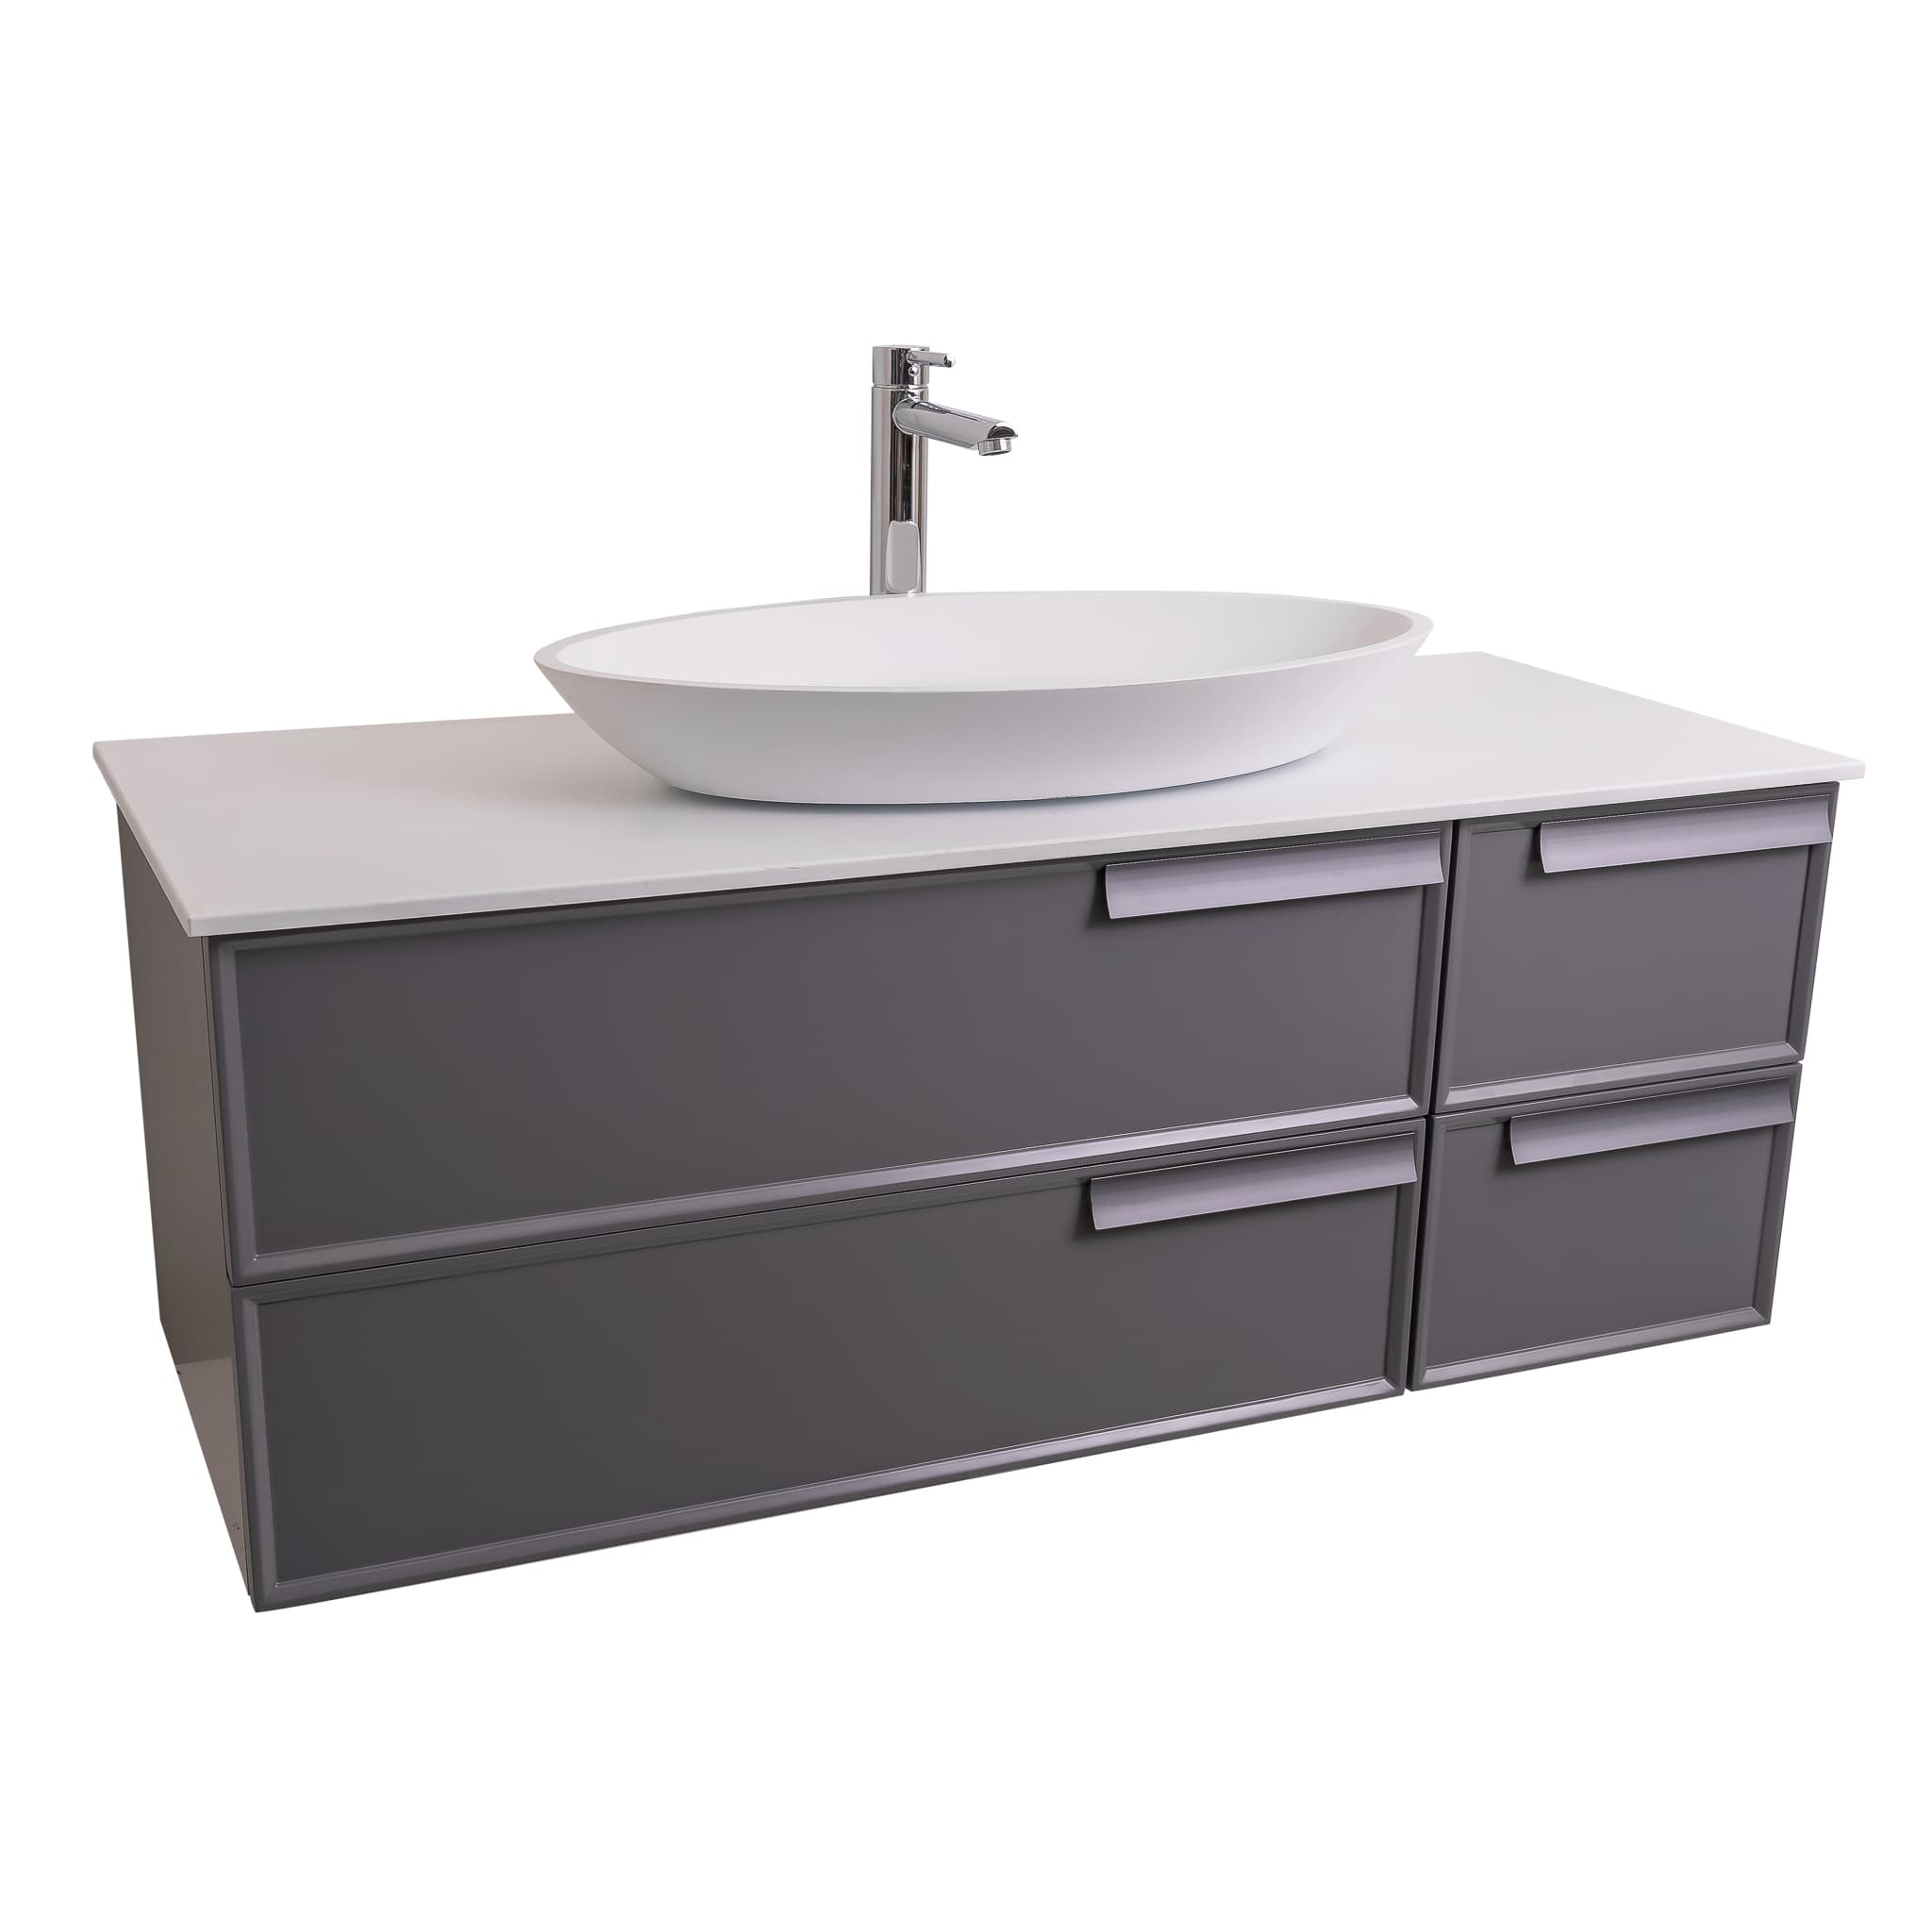 Garda 47.5 Matte Grey Cabinet, Solid Surface Flat White Counter and Oval Solid Surface White Basin 1305, Wall Mounted Modern Vanity Set